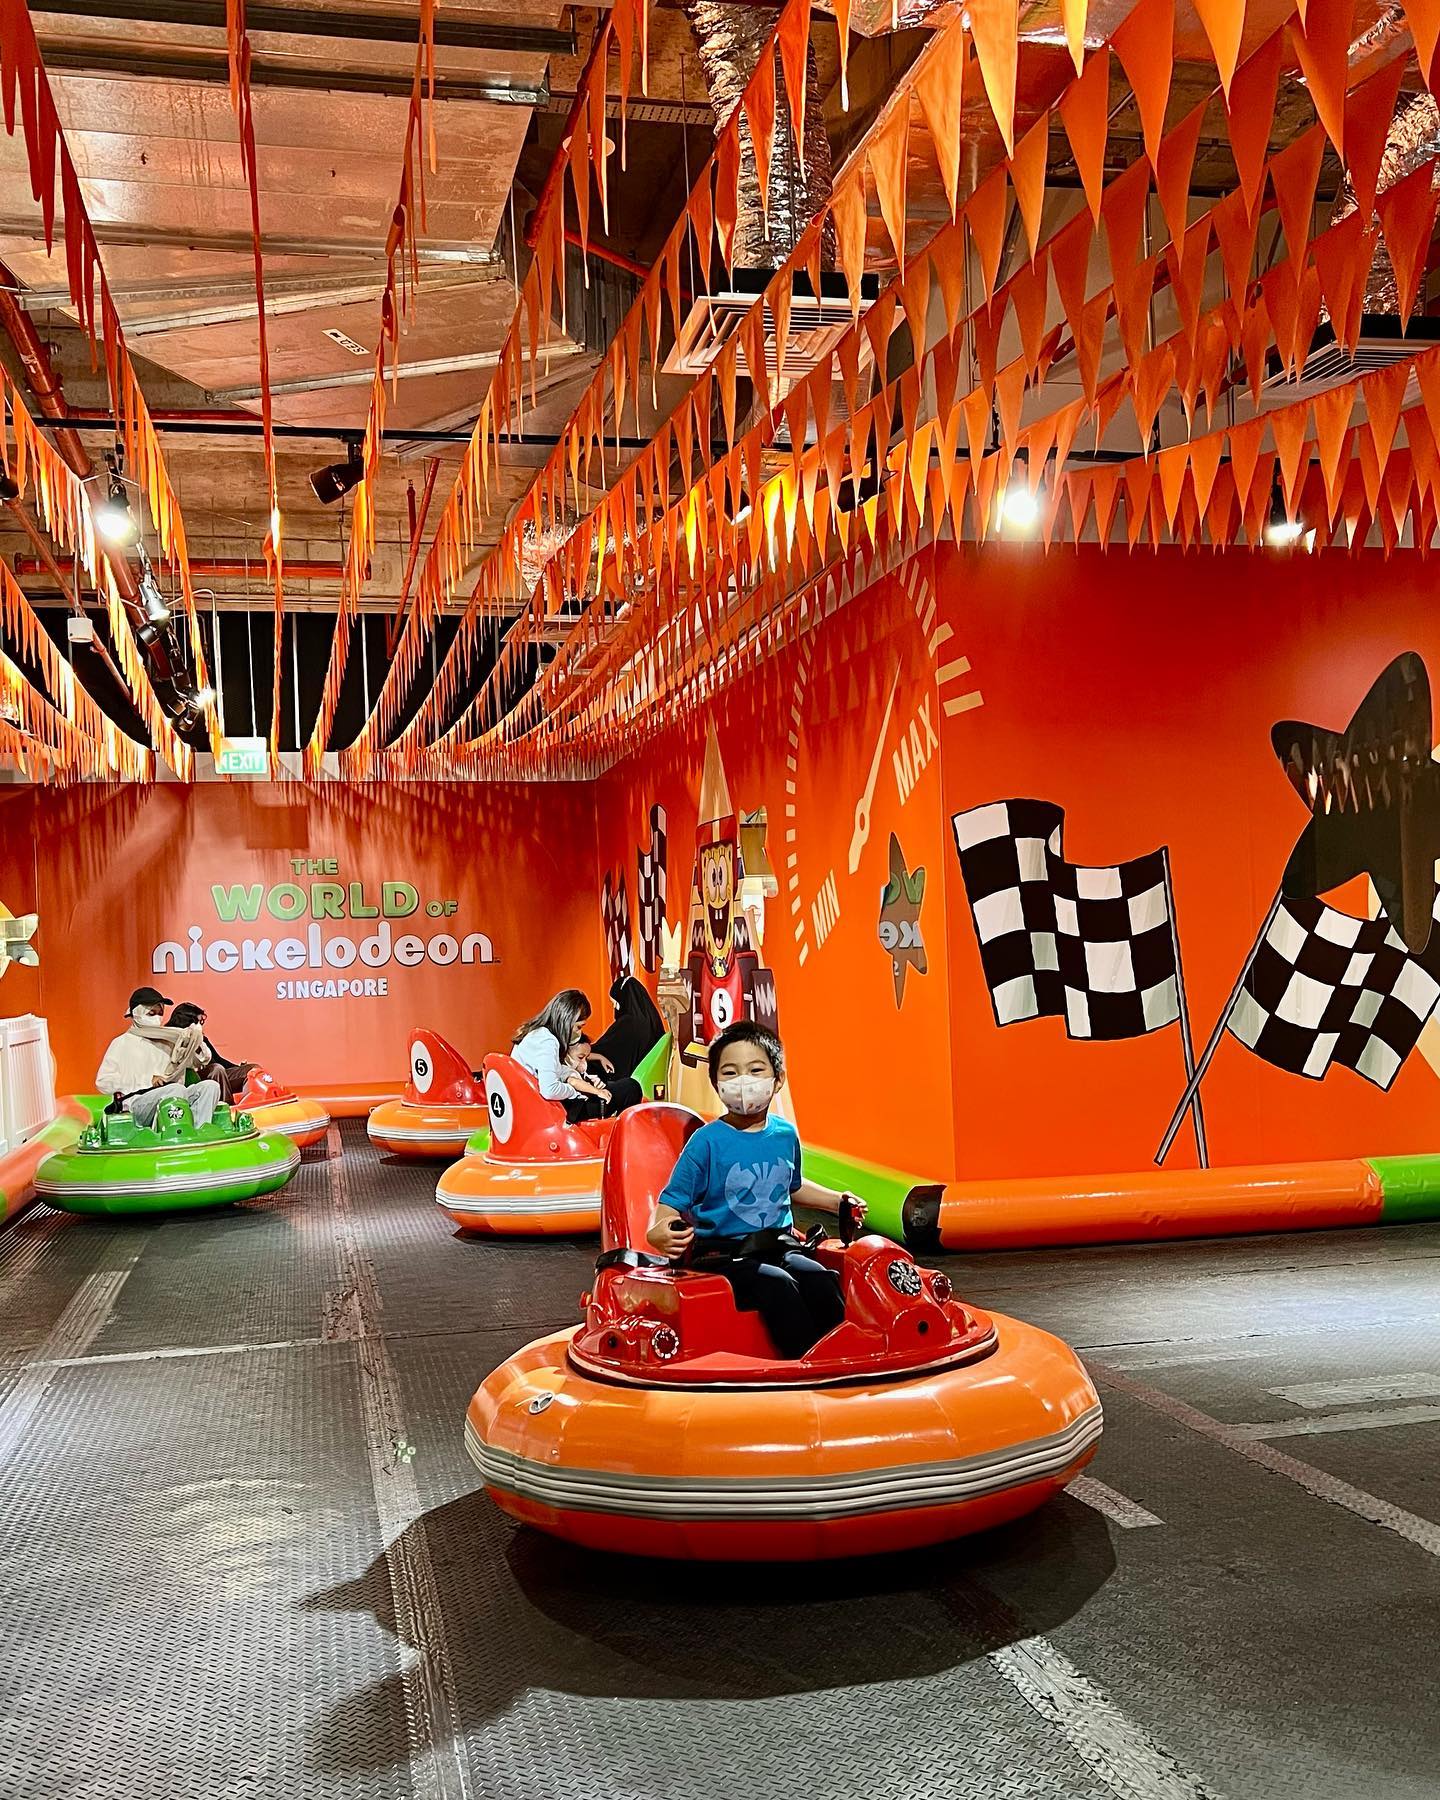 Family-friendly activities in June 2022 - bumper cars